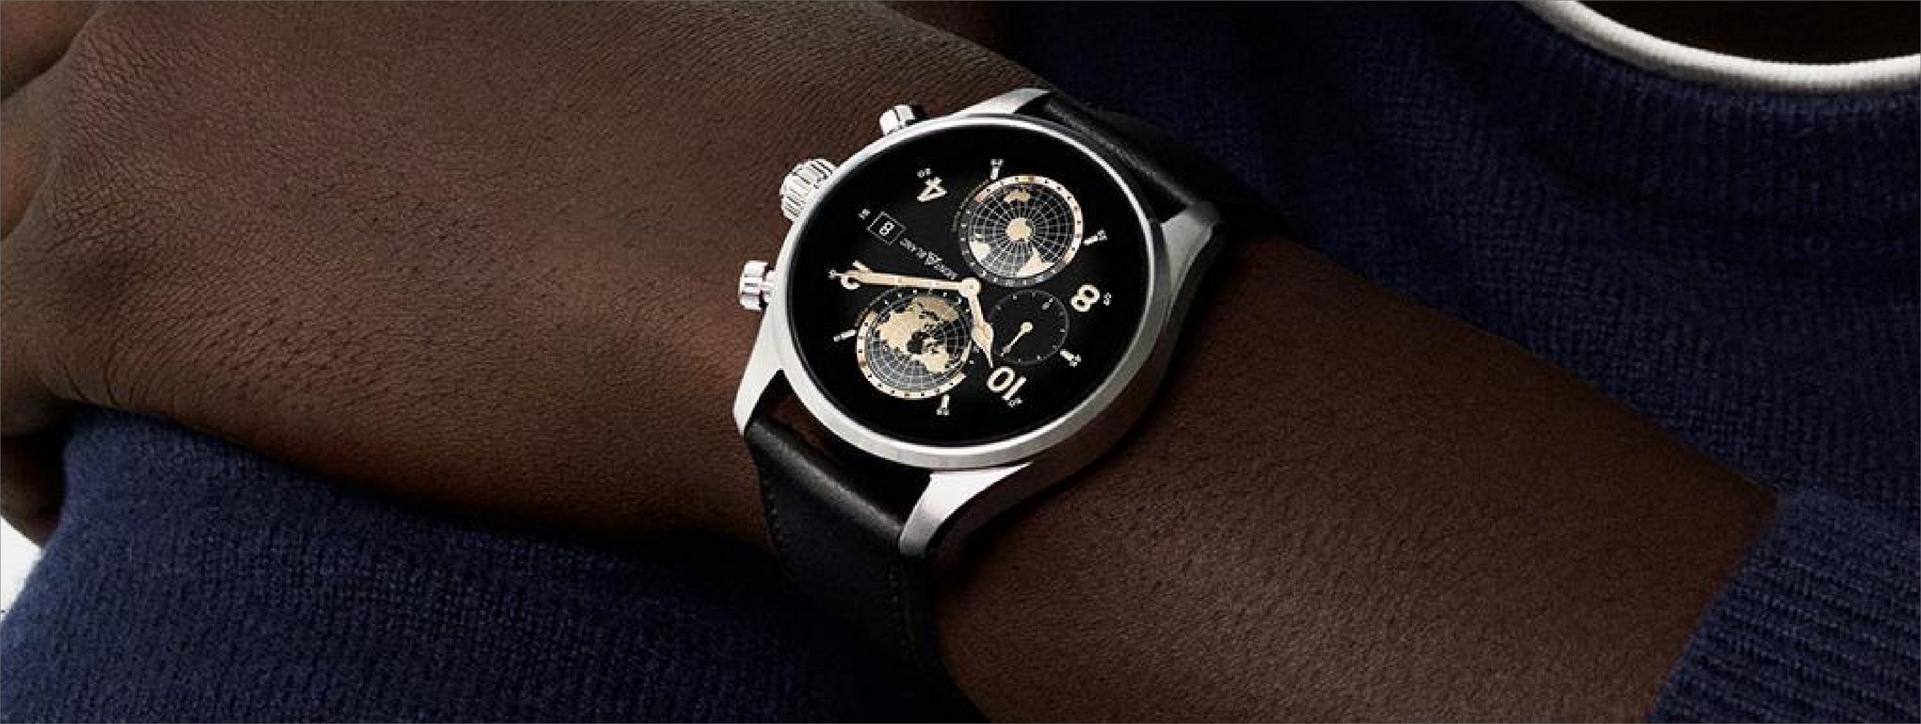 Montblanc Gifts, Watches & Leather Goods at Ernest Jones